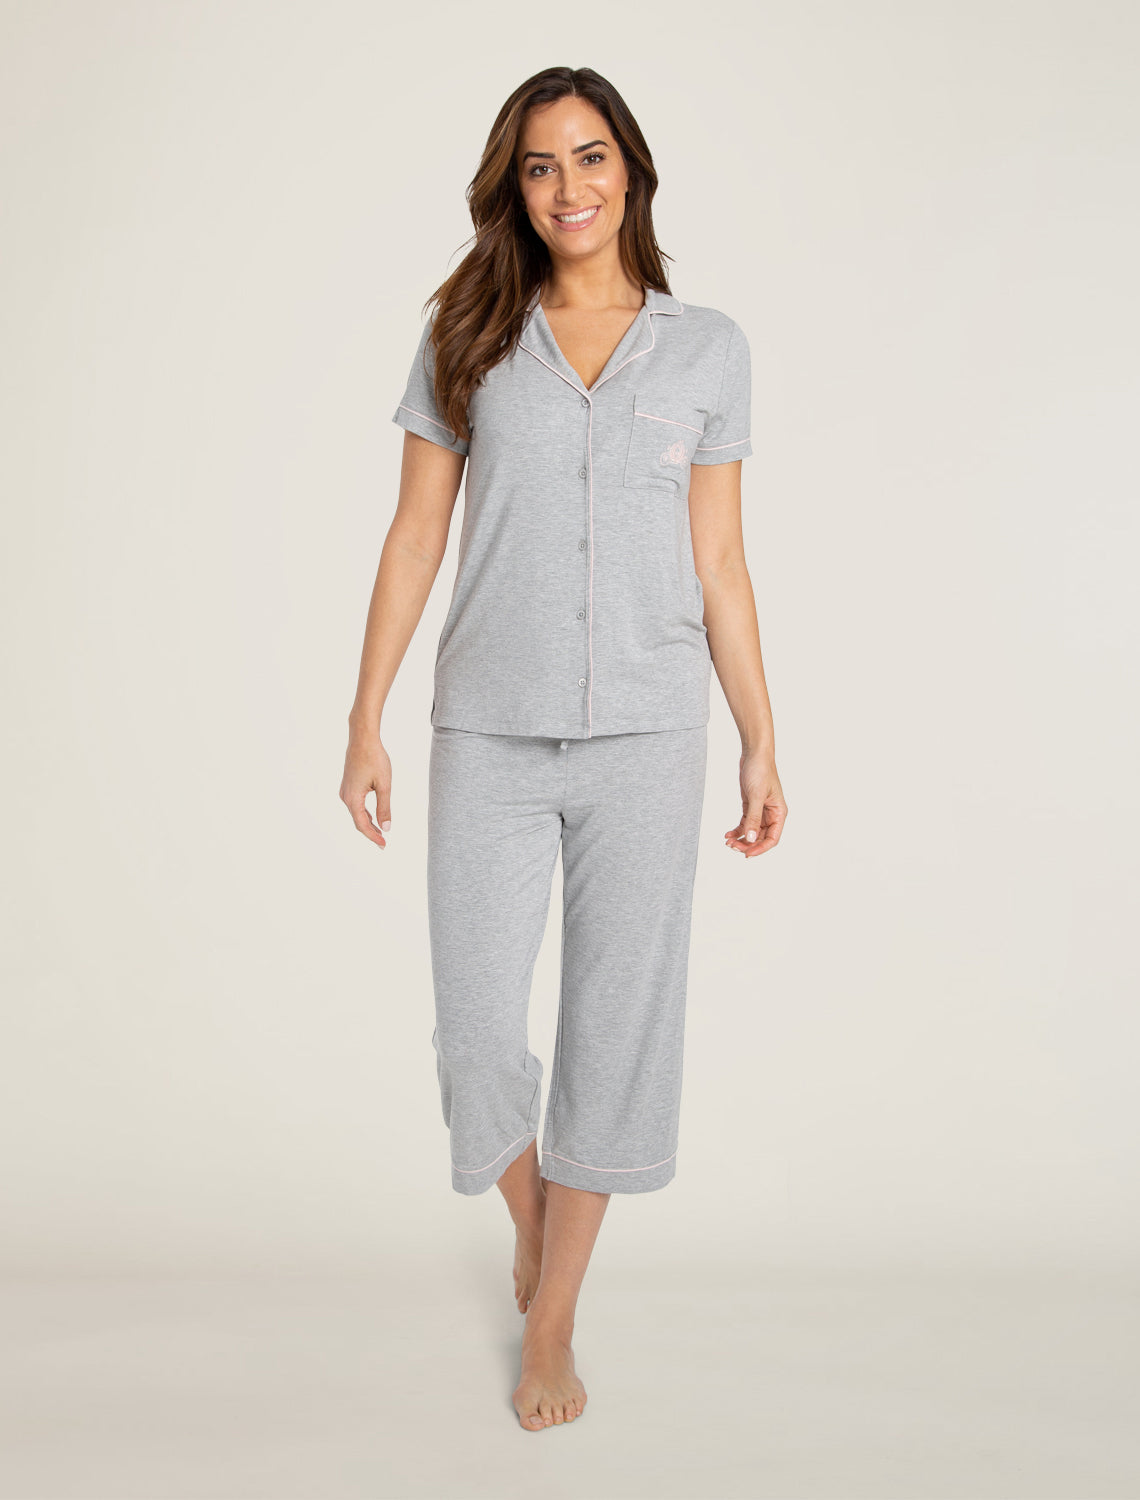 Pajama outfit for women's